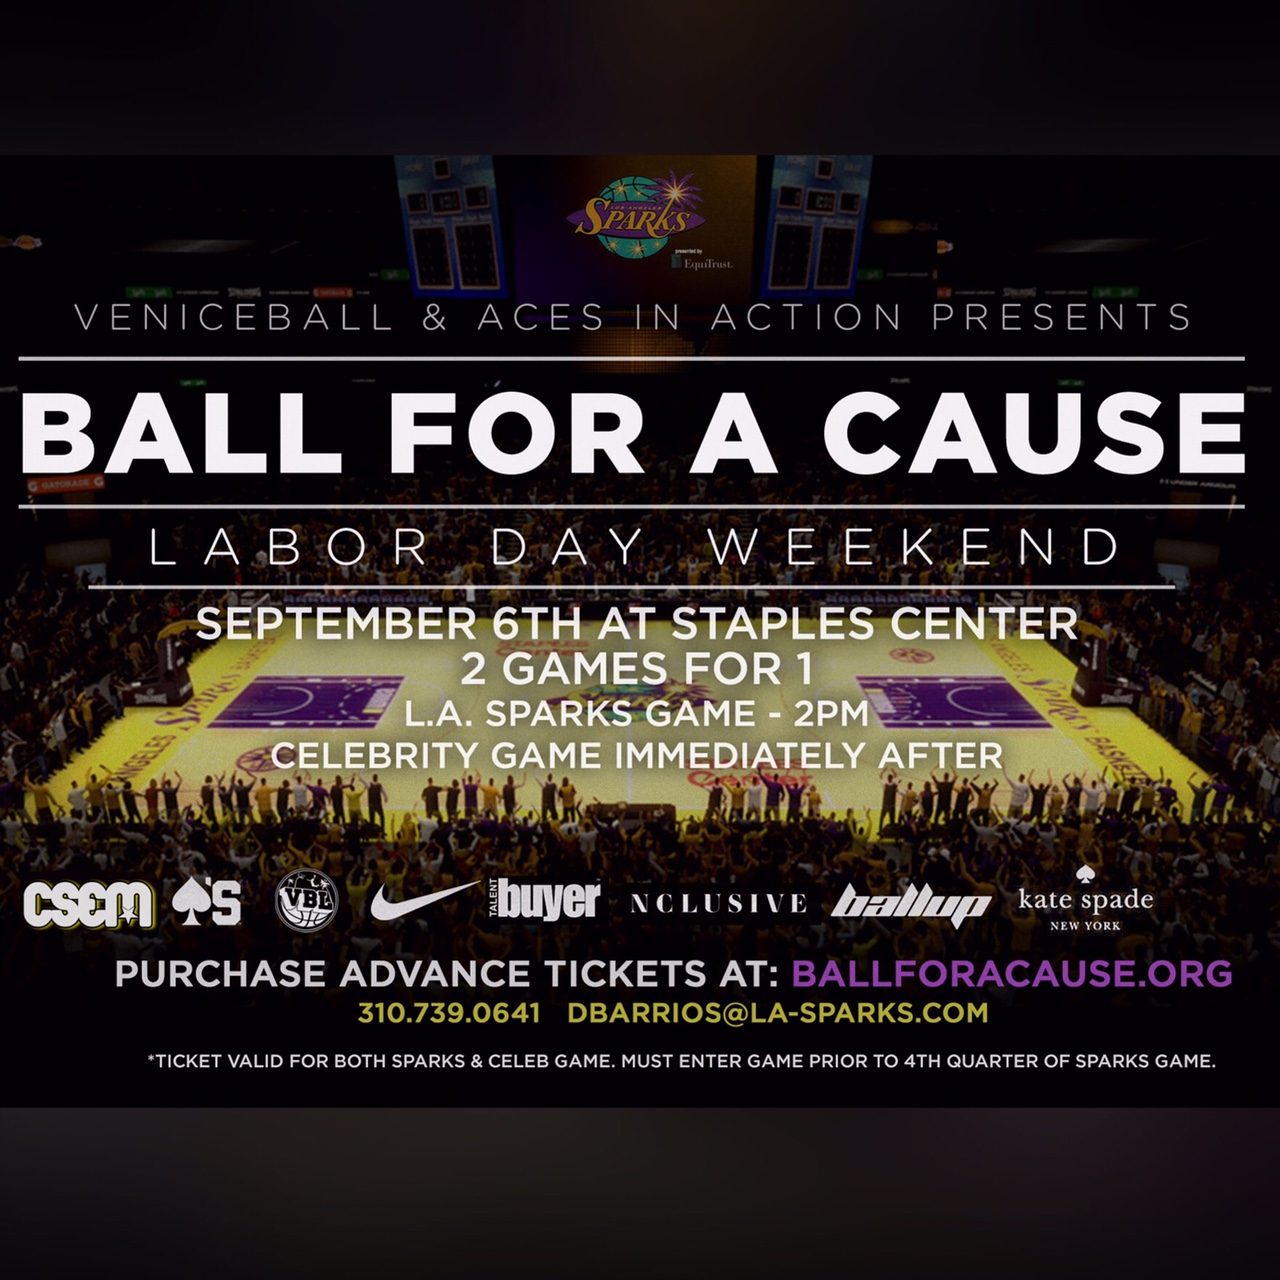 BALL FOR A CAUSE CELEBRITY GAME